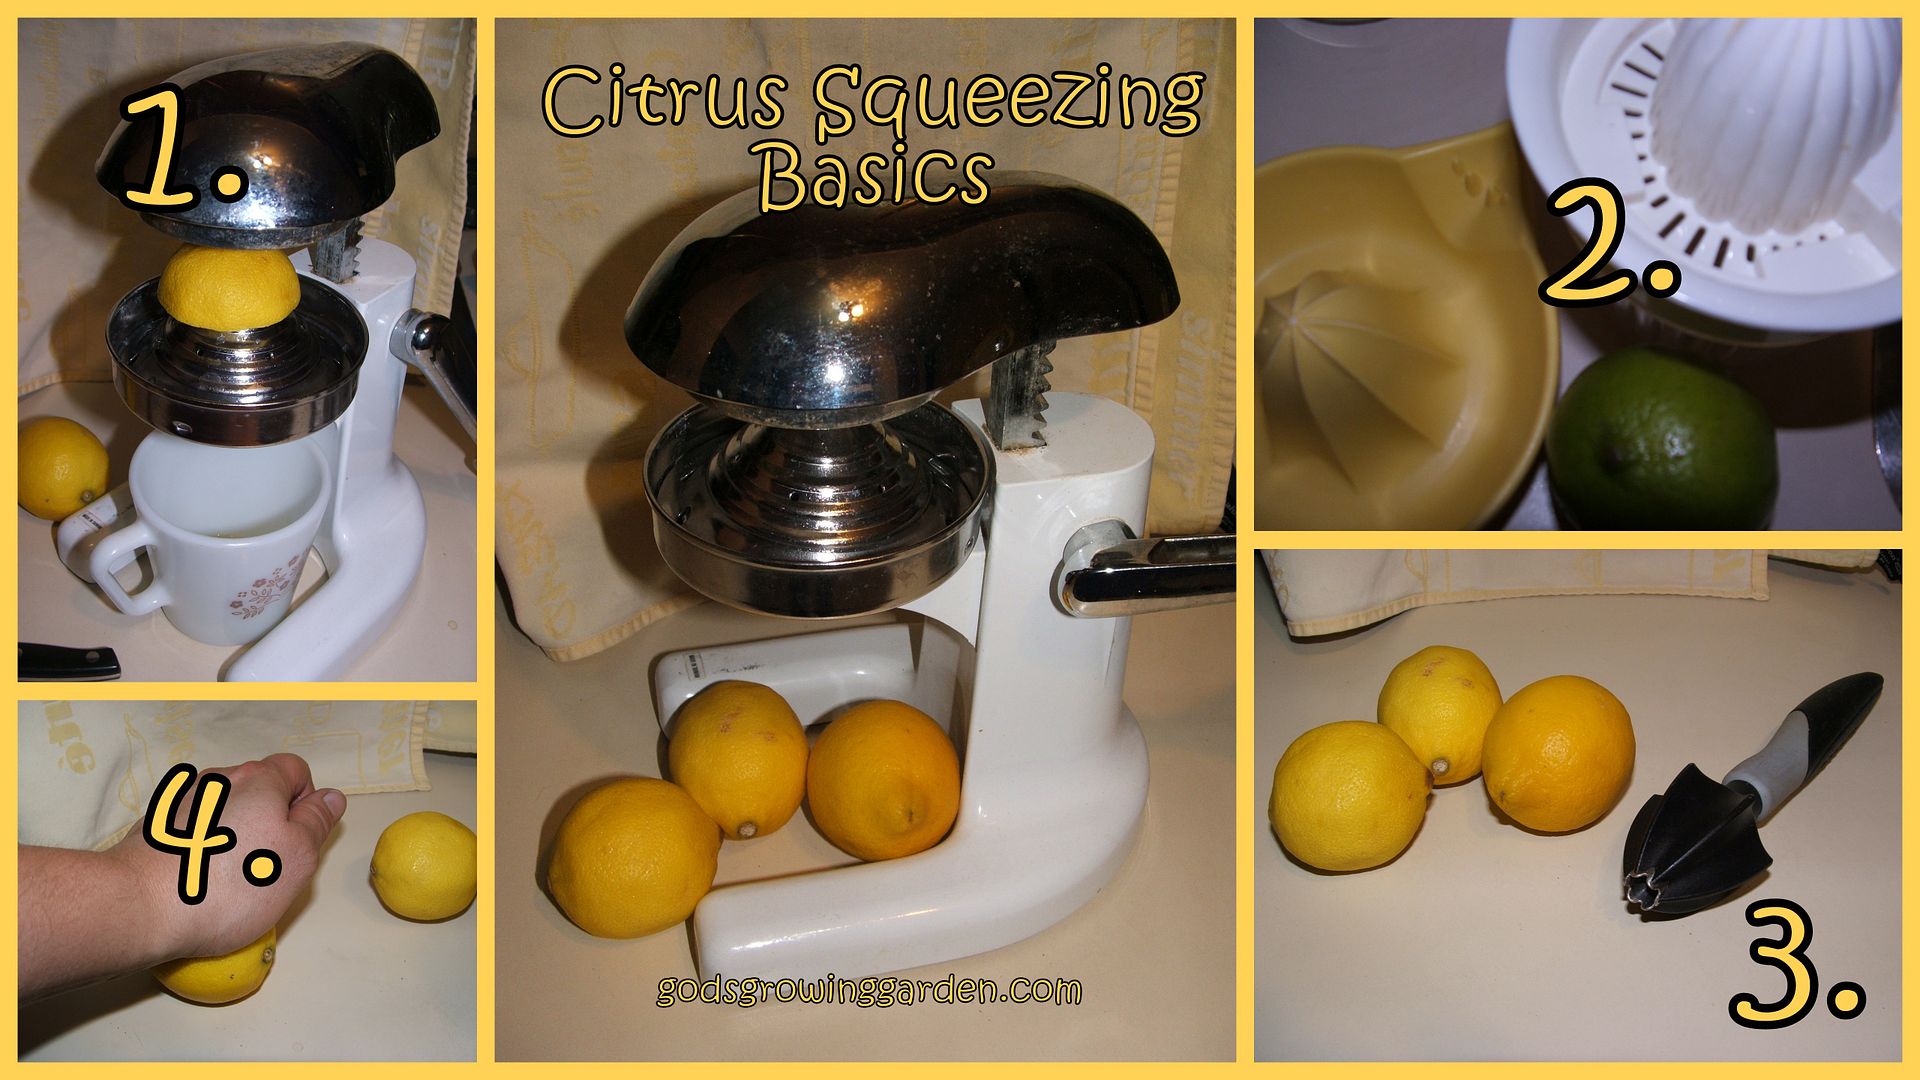 Citrus Squeezing basics by Angie Ouellette-Tower for godsgrowinggarden.com photo 2013-08-27_zps3b0c8090.jpg